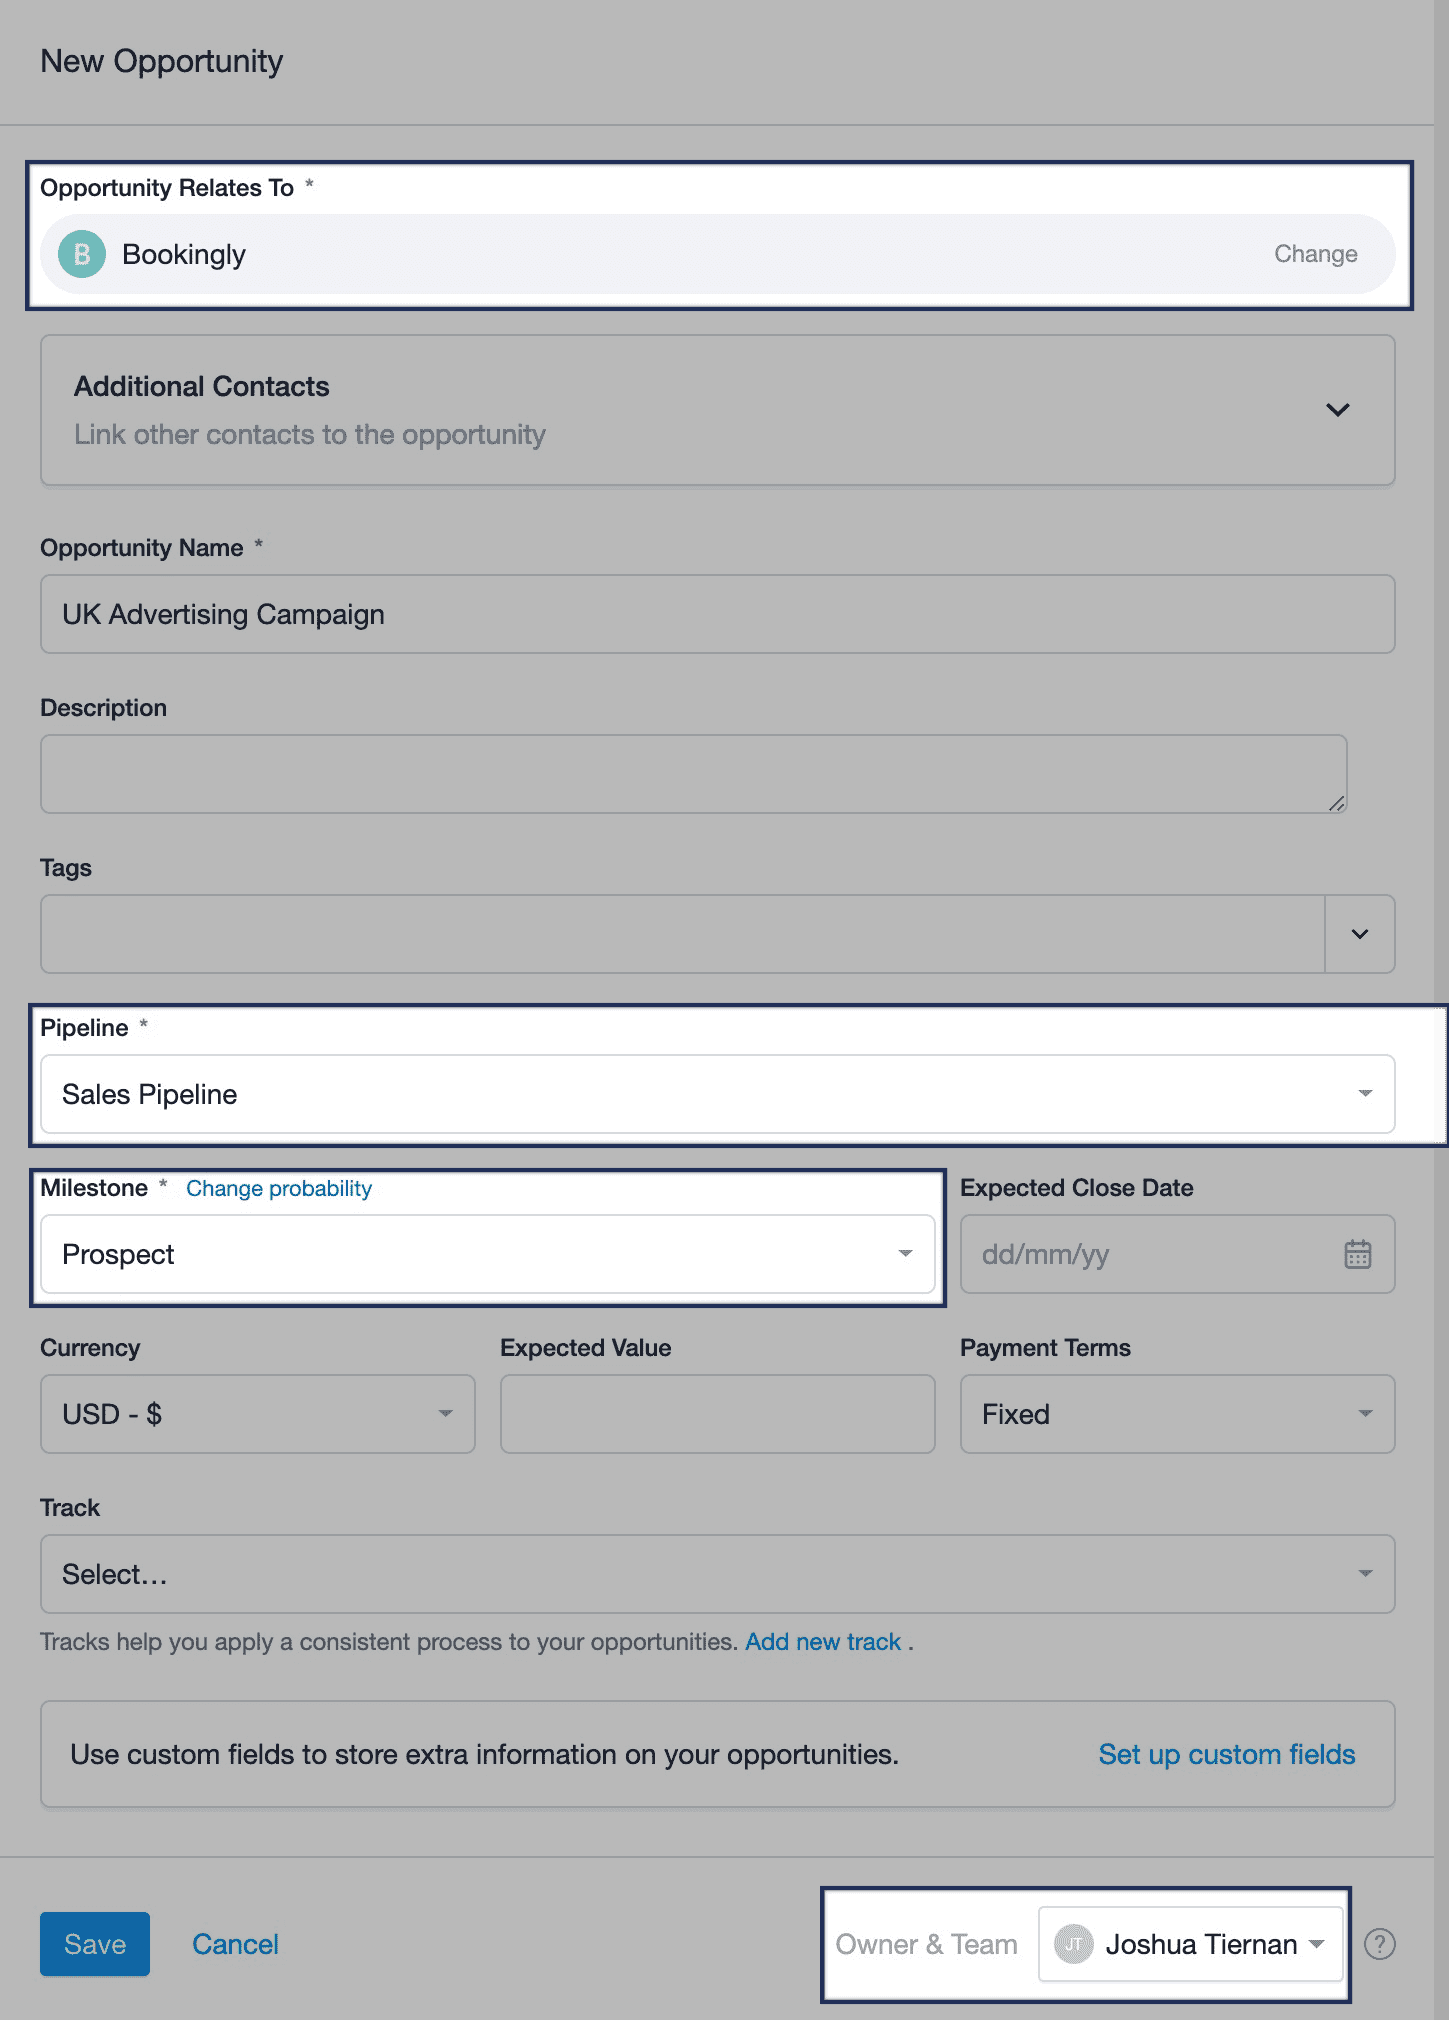 New opportunity form with default fields - pipeline and milestone with owner & team highlighted